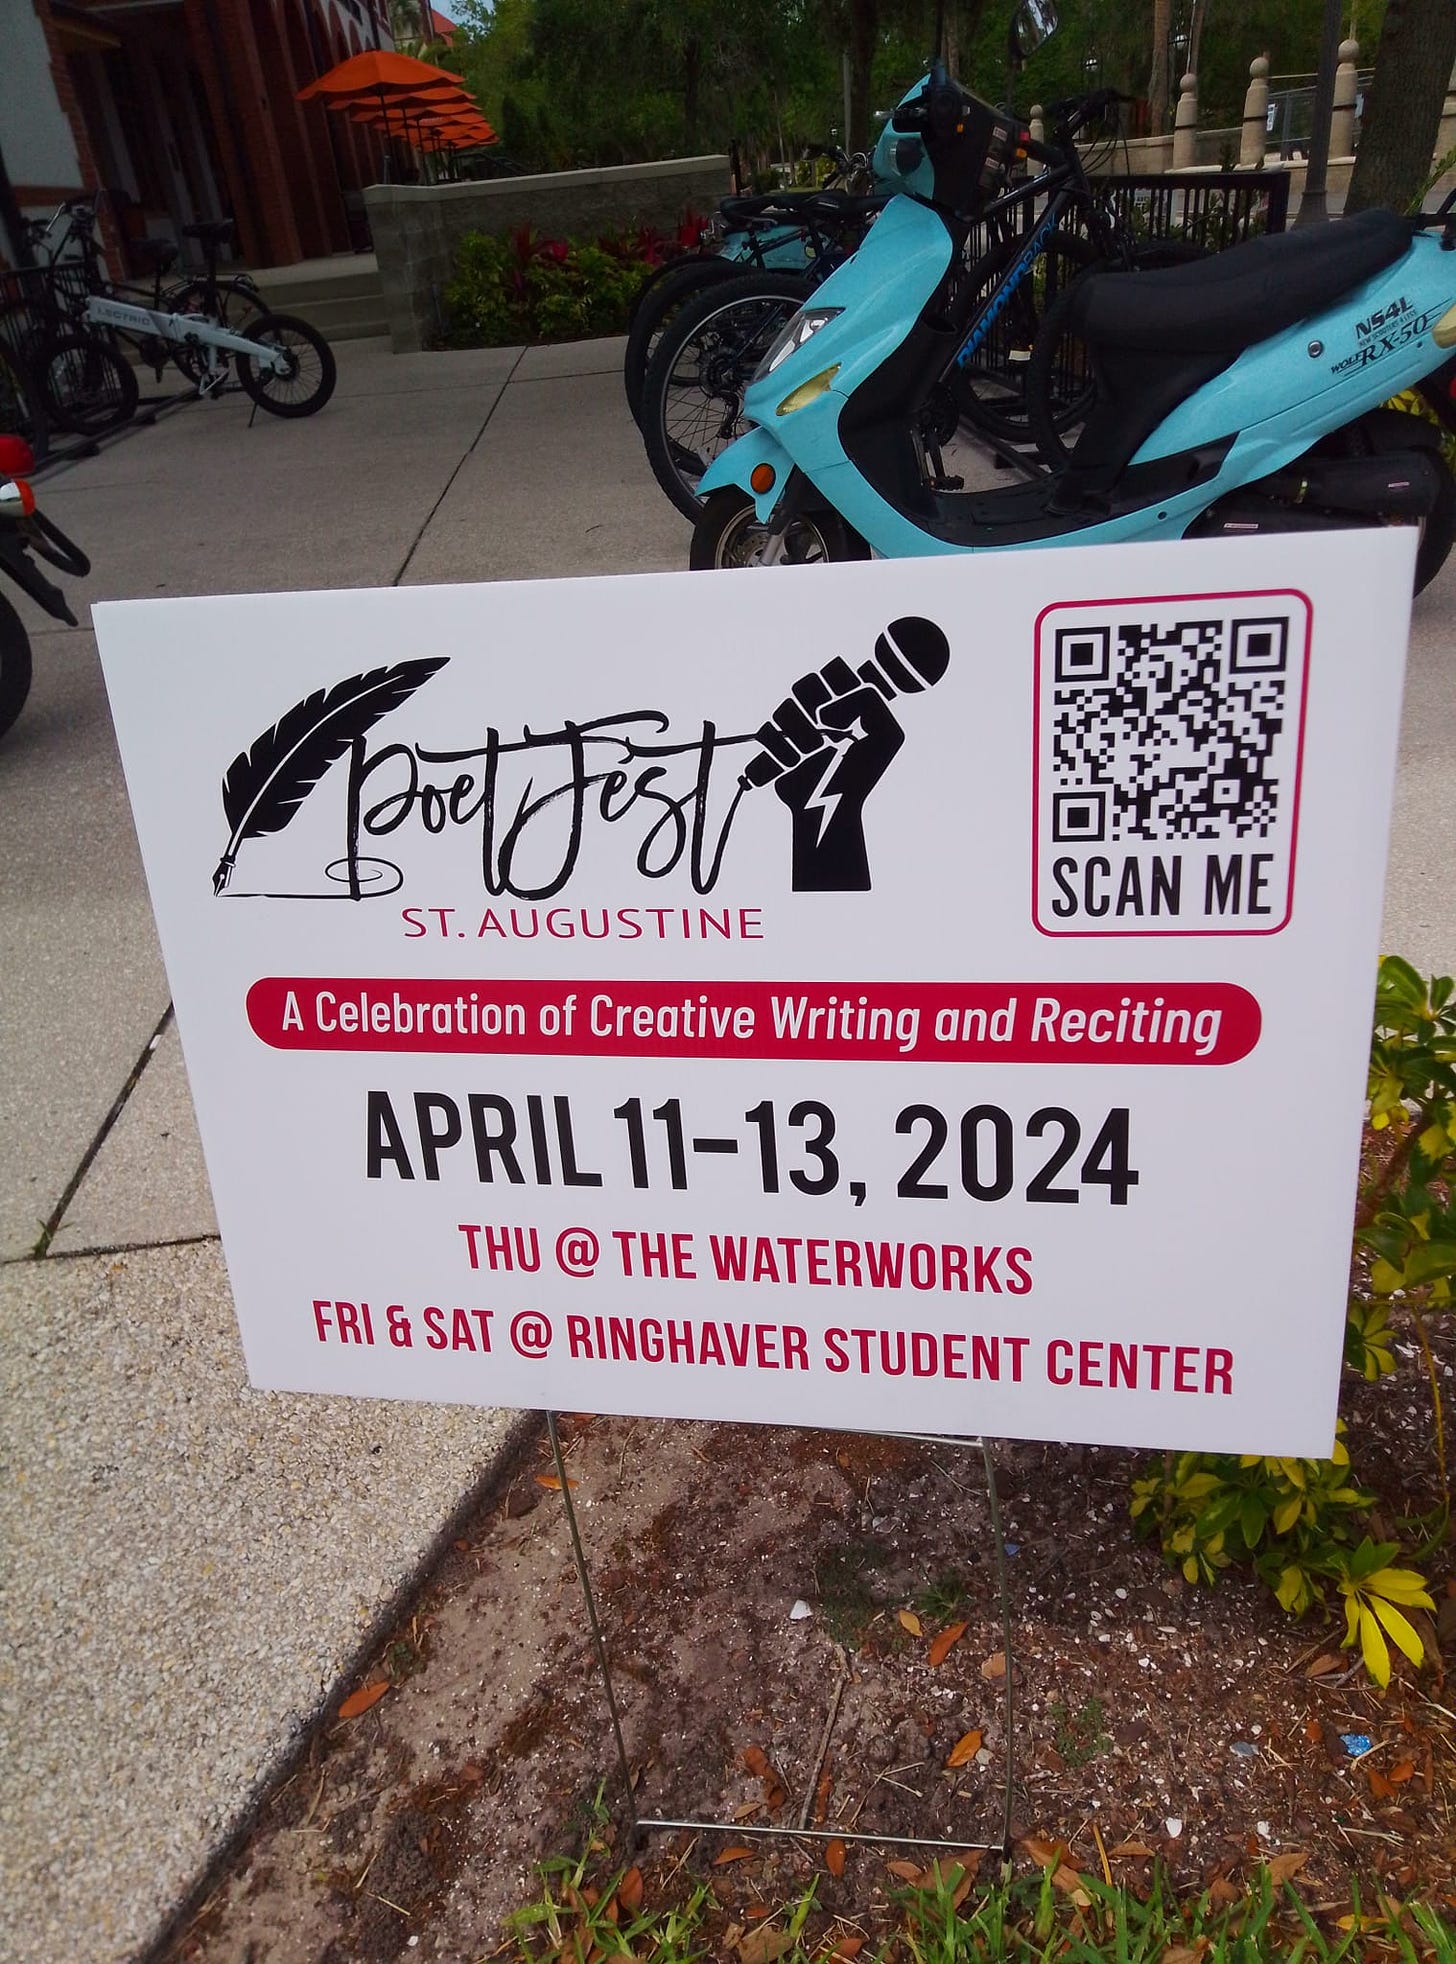 May be an image of motorcycle, scooter and text that says 'NRA 1ン SCAN ME रमद्हारथथ া पणमव्धा ST.AUGUSTINE A Celebration of Creative Writing and Reciting APRIL11- APRIL11-13,2024 11-13, 2024 THU a THE WATERWORKS FRI&SAT FRI & SAT @ RINGHAVER STUDENT CENTER'